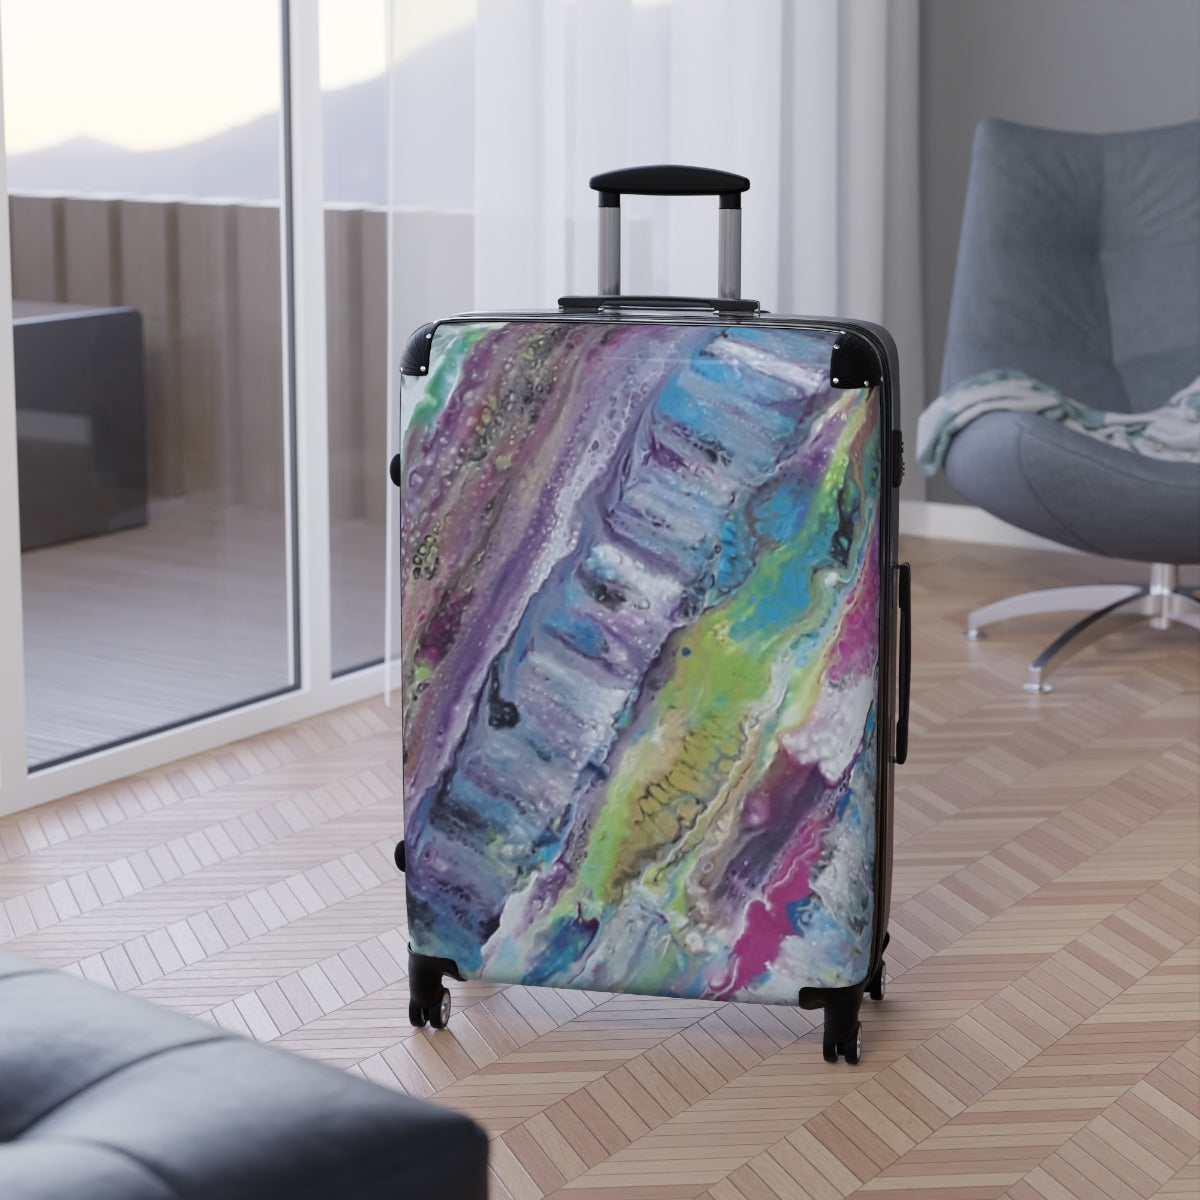 SUITCASES CARRY-ON By Artzira, Original Abstract Art Print, Cabin Suitcases, Luggage with Wheels, Trolly Travel Bag, Double Wheeled Spinner